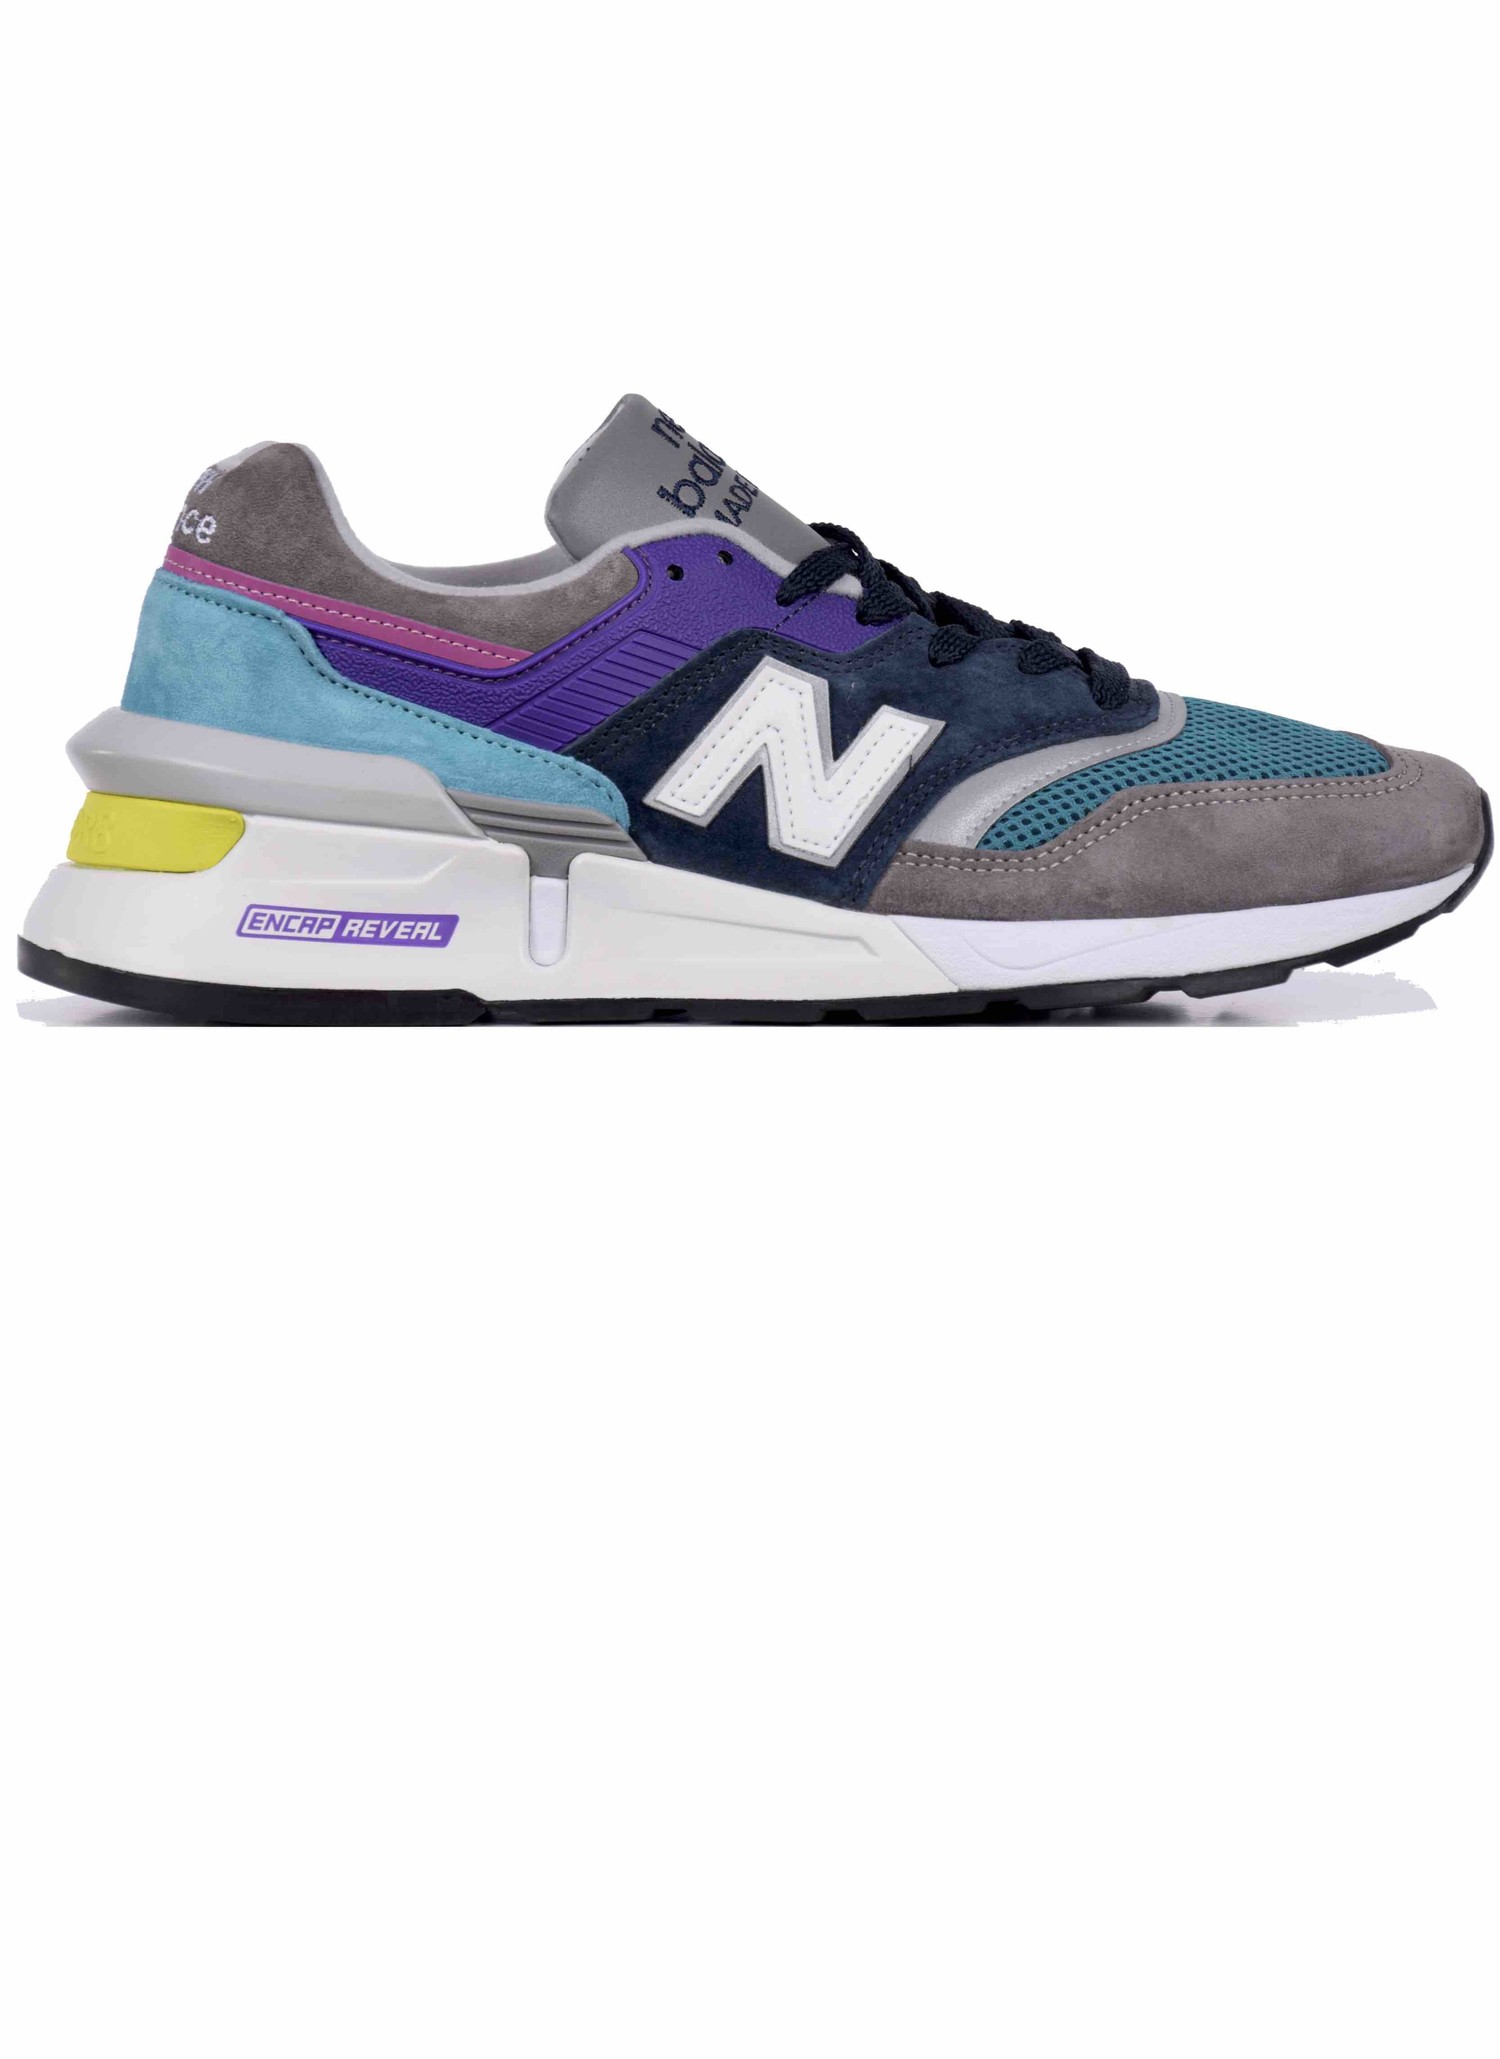 New Balance M 997 SMG "Made in USA" Sneakers Grey | HALO - HALO